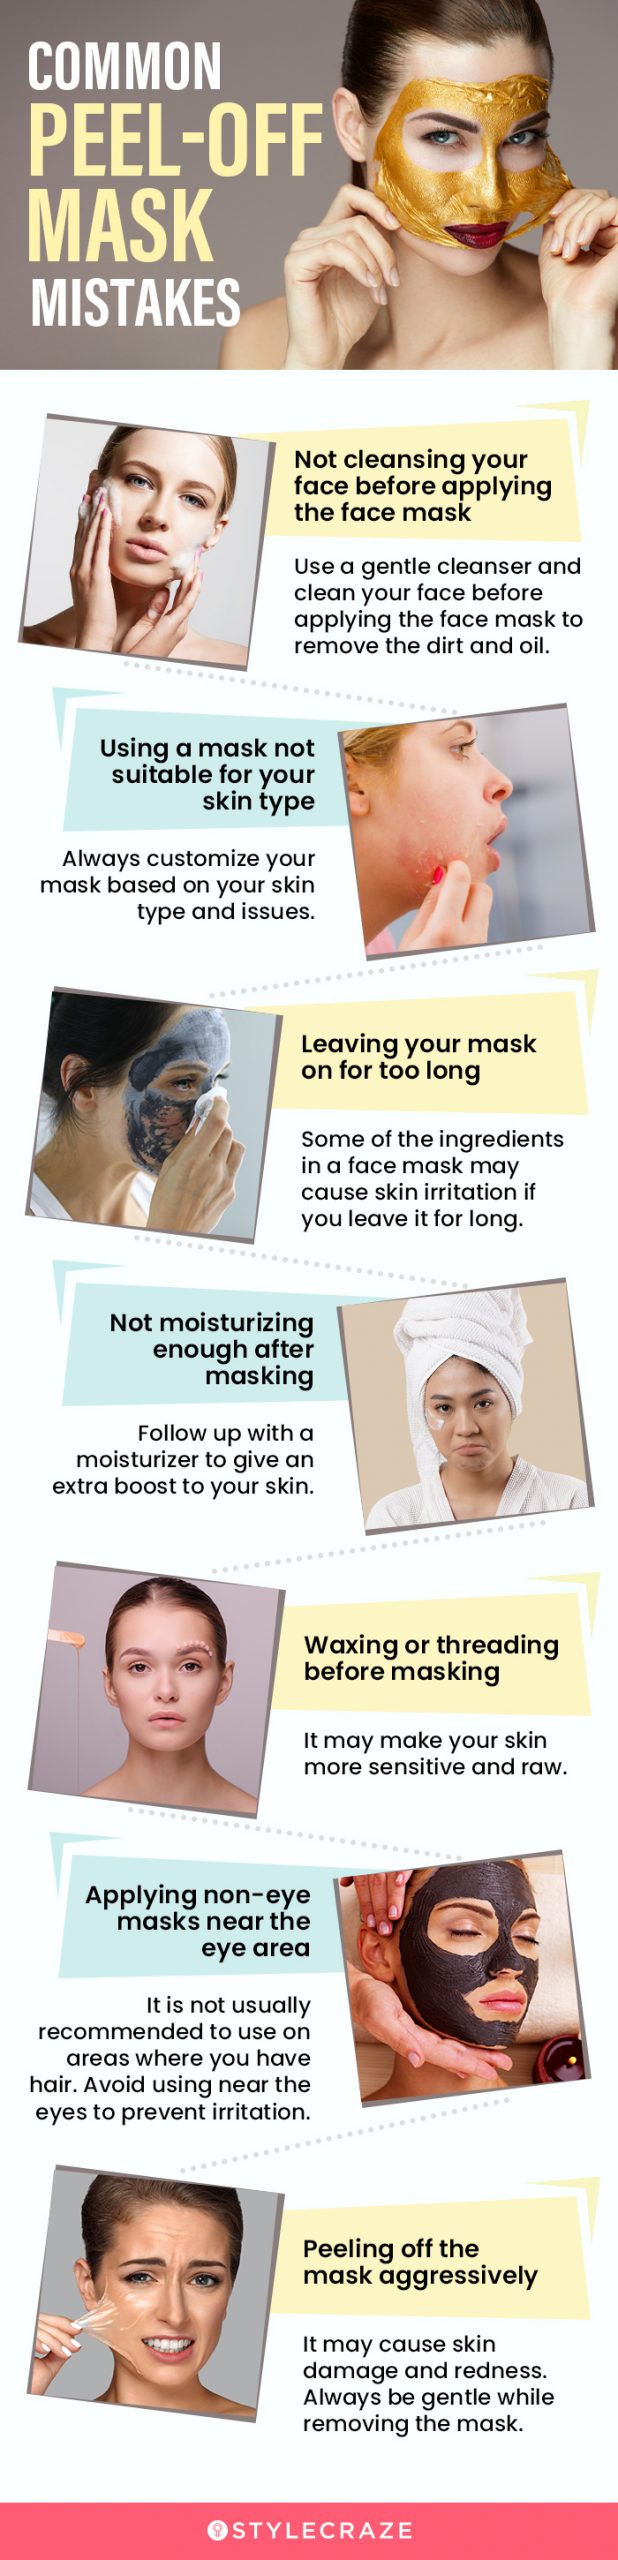 common peel off mask mistakes (infographic)